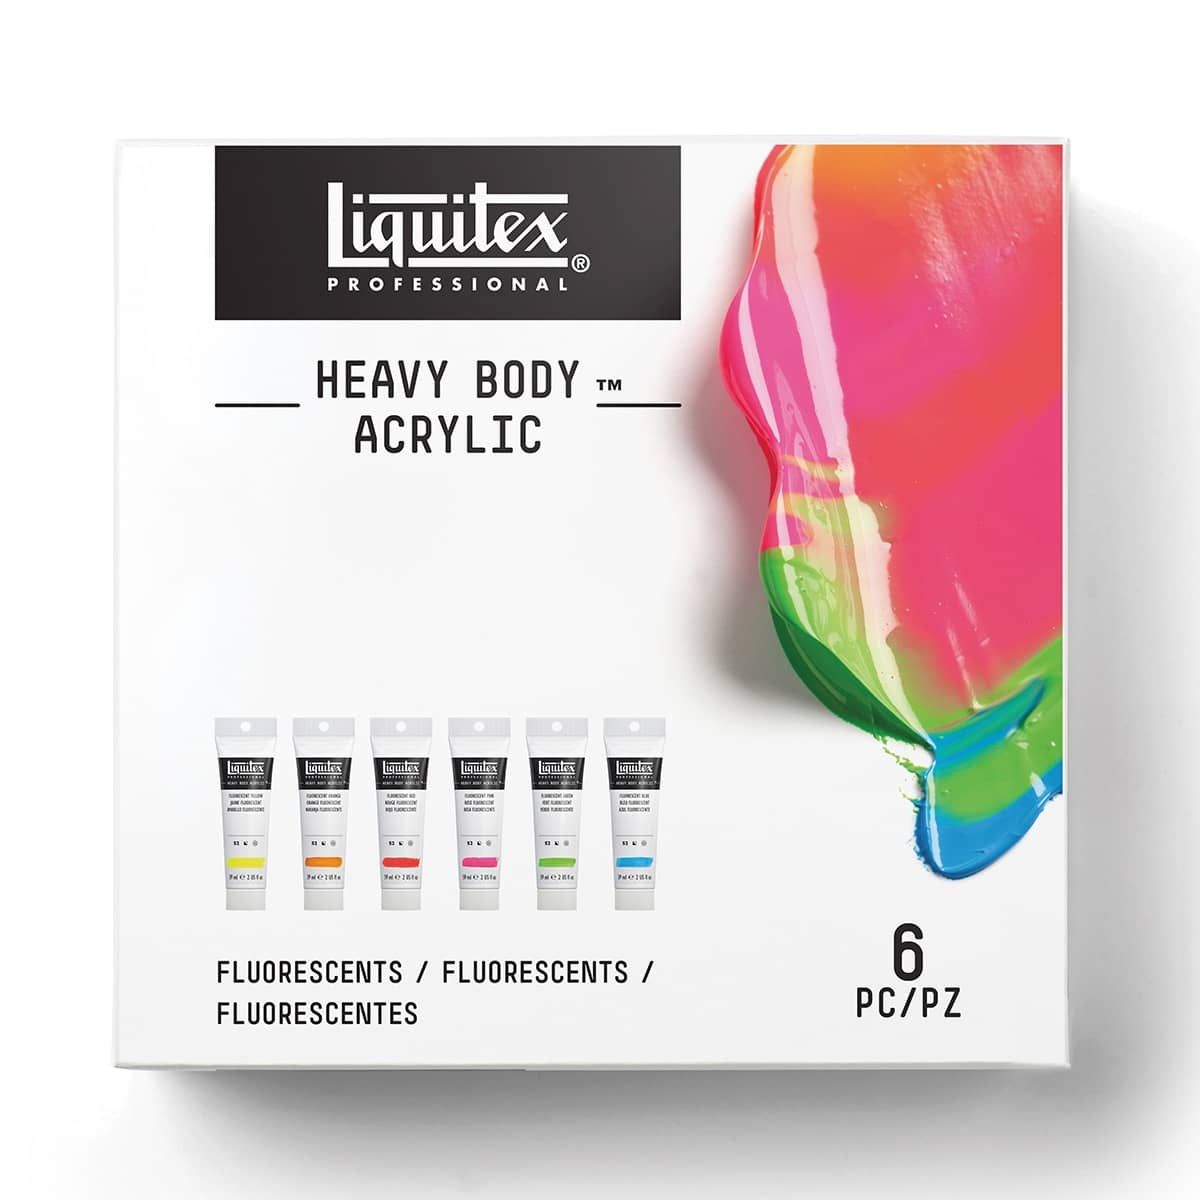 Liquitex Soft Body Acrylic Vs Heavy Body - see the difference